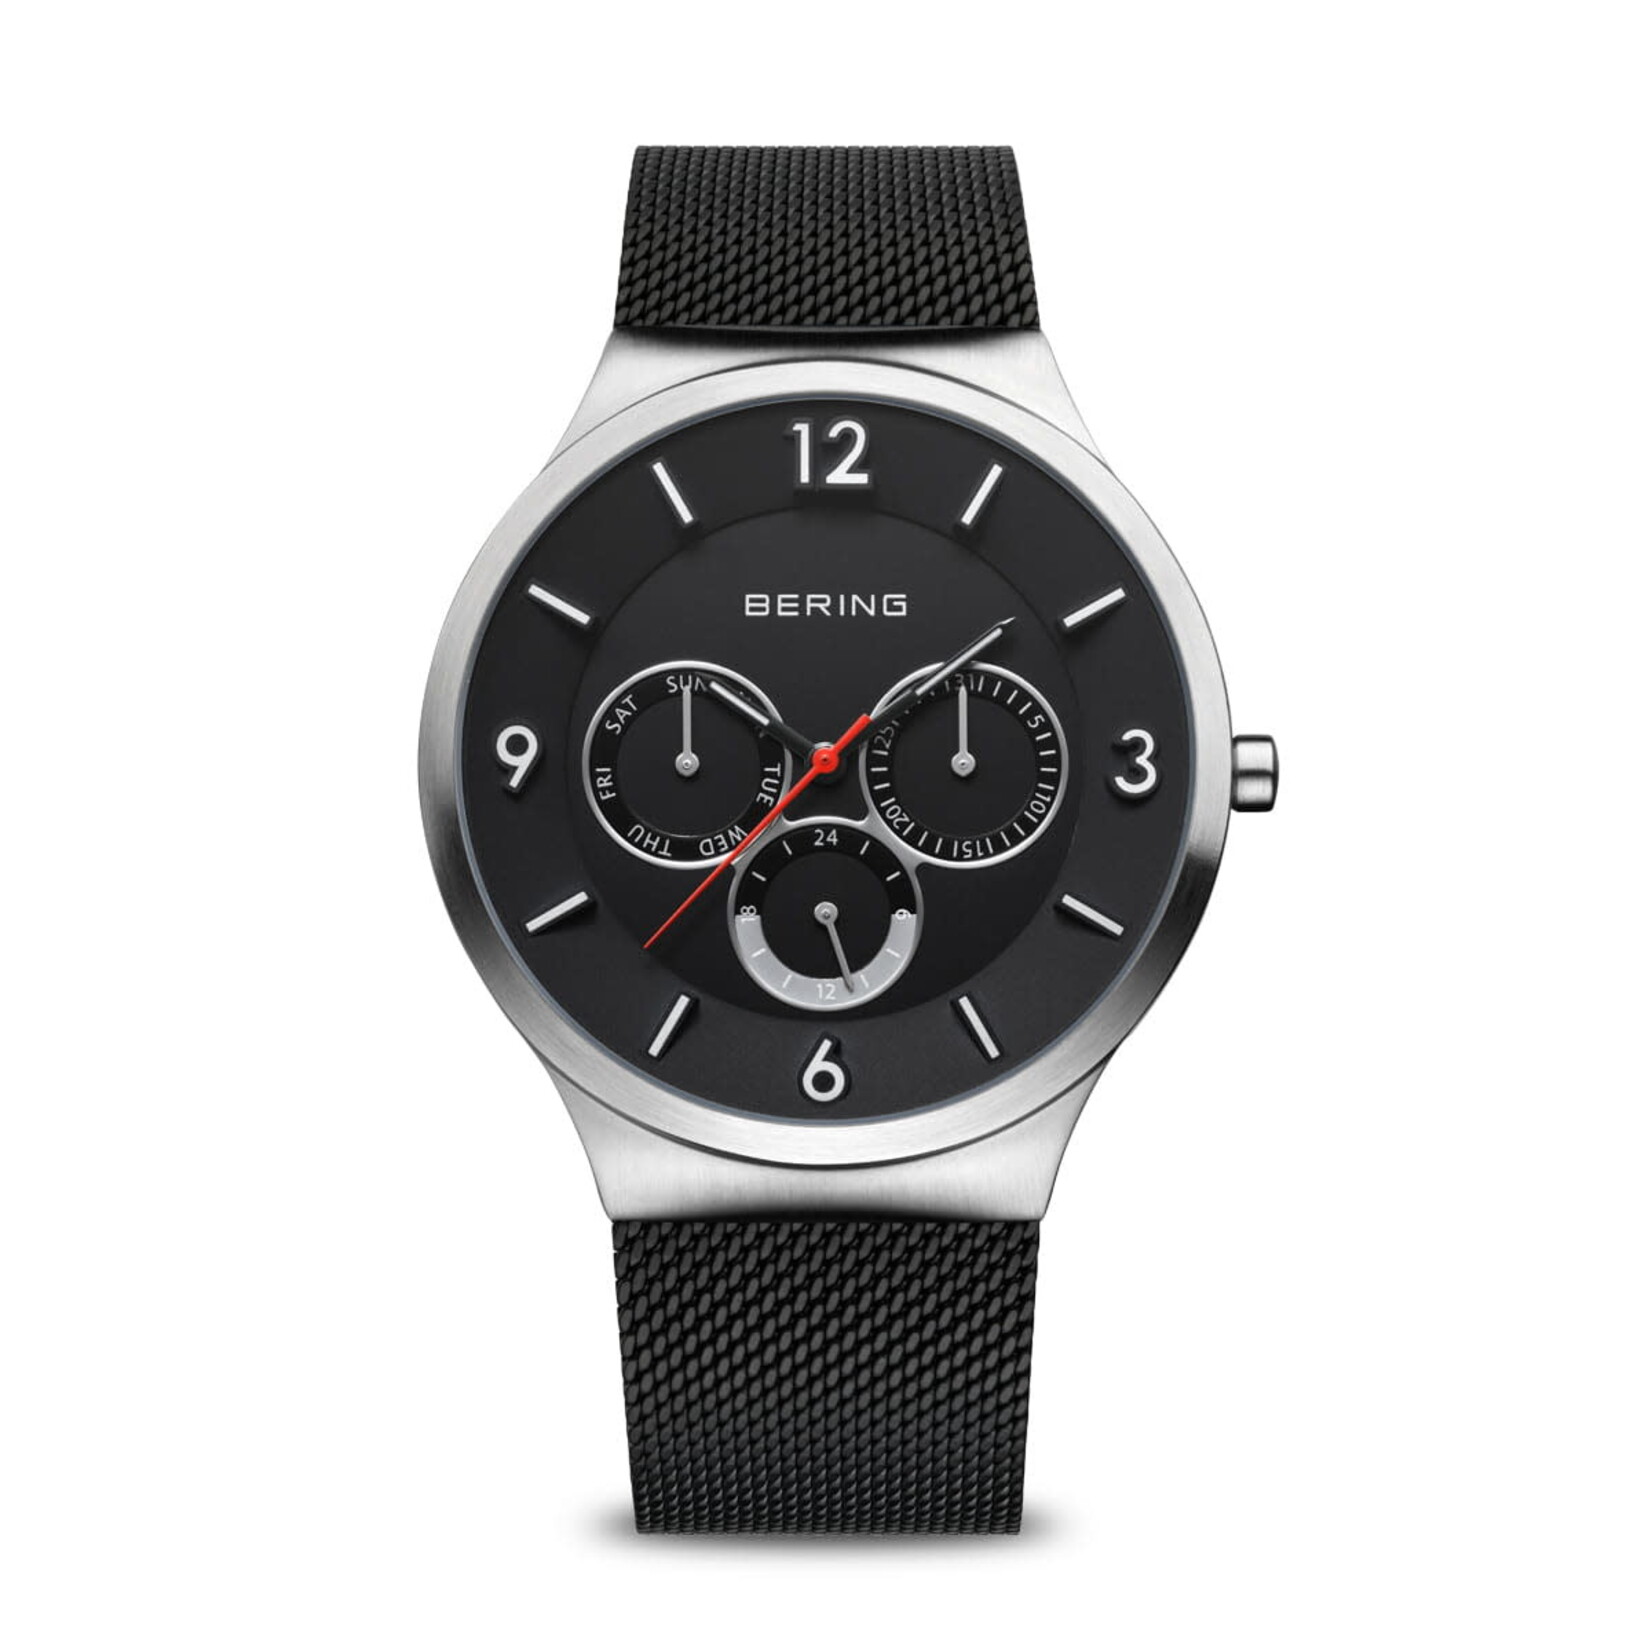 Bering Black and Silver Multifuncation Watch